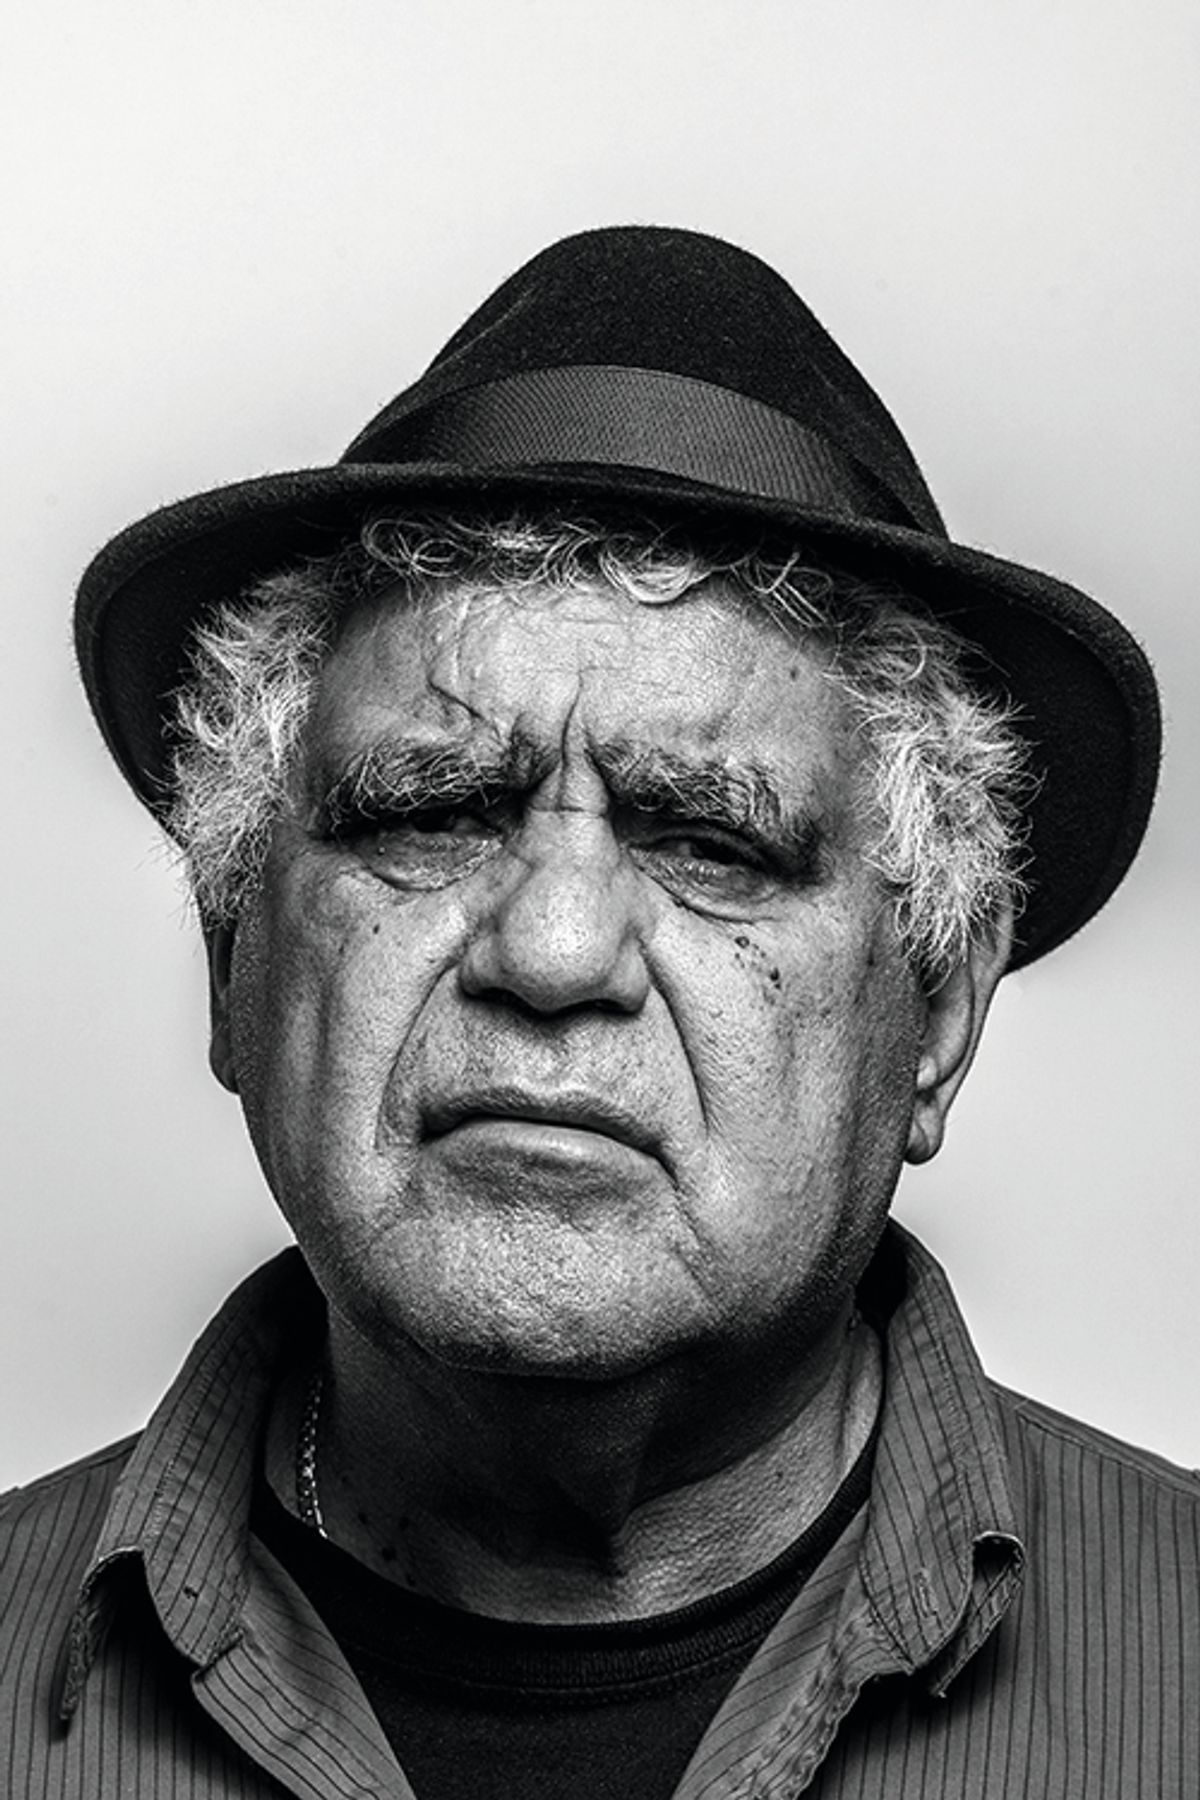 Richard Bell, who for decades has highlighted the erasure of Australia’s Indigenous culture, will discuss the documentary, You Can Go Now, at the Gene Siskel Film Center

Courtesy of Milani Gallery, Brisbane and OSMOS, New York